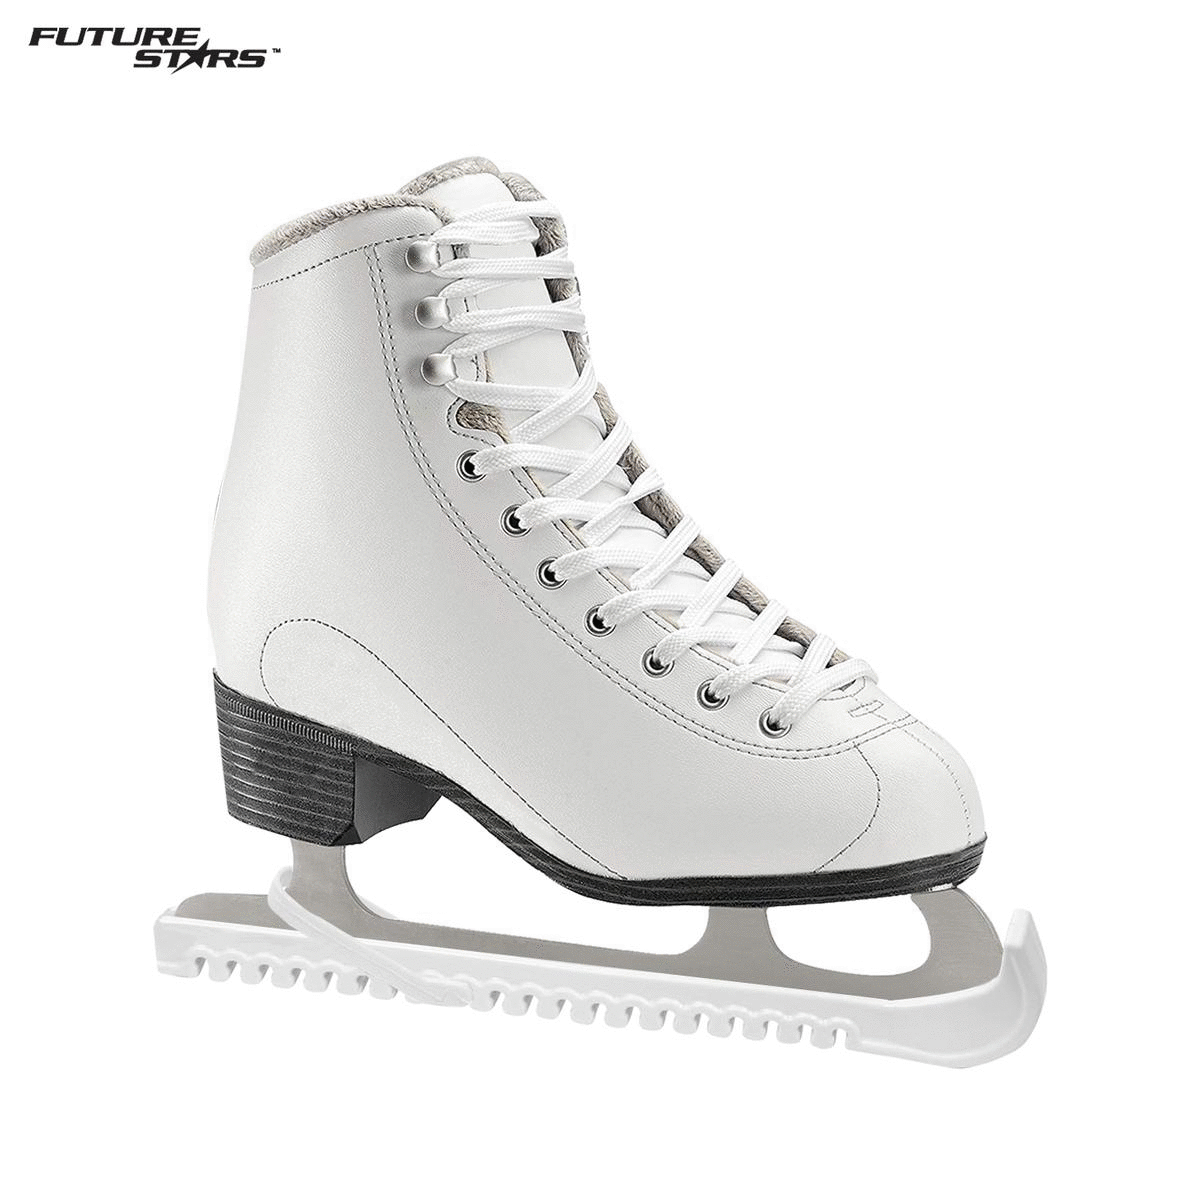 Plastic Ice Figure Skate Walking Blade Guards Protector Covers for Kids Adult 